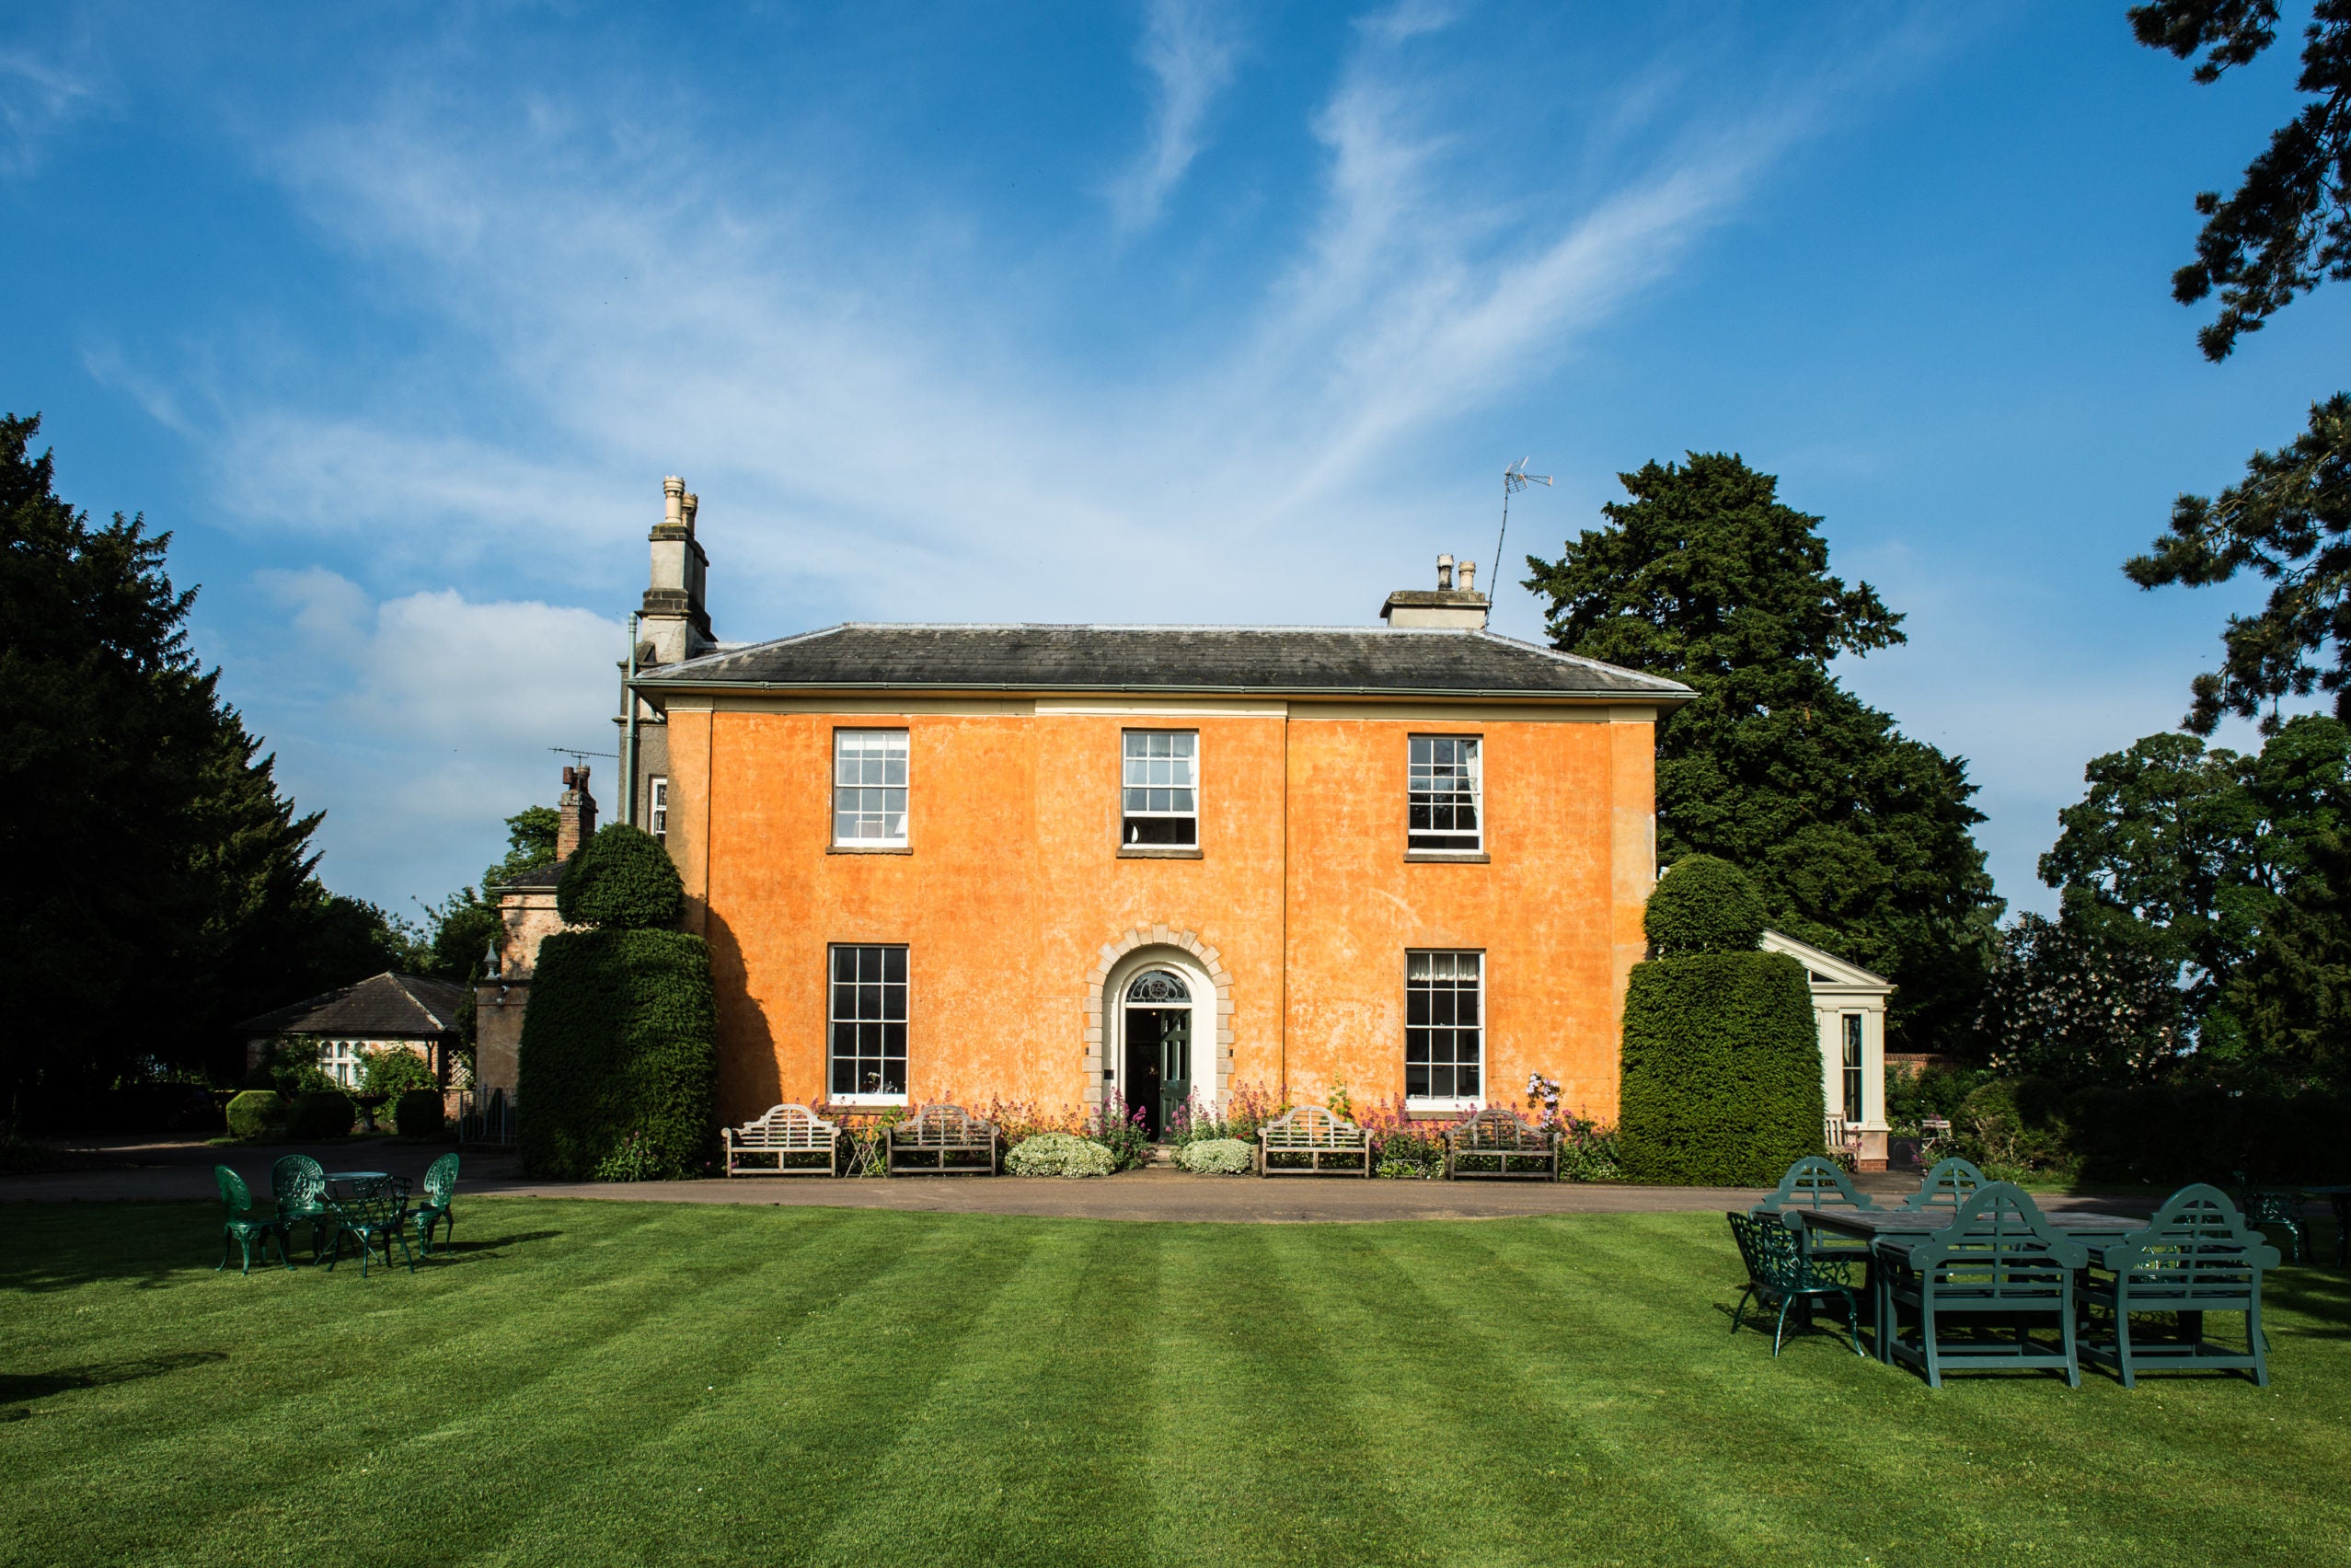 Langar Hall combines the personality of its owners with a storied history